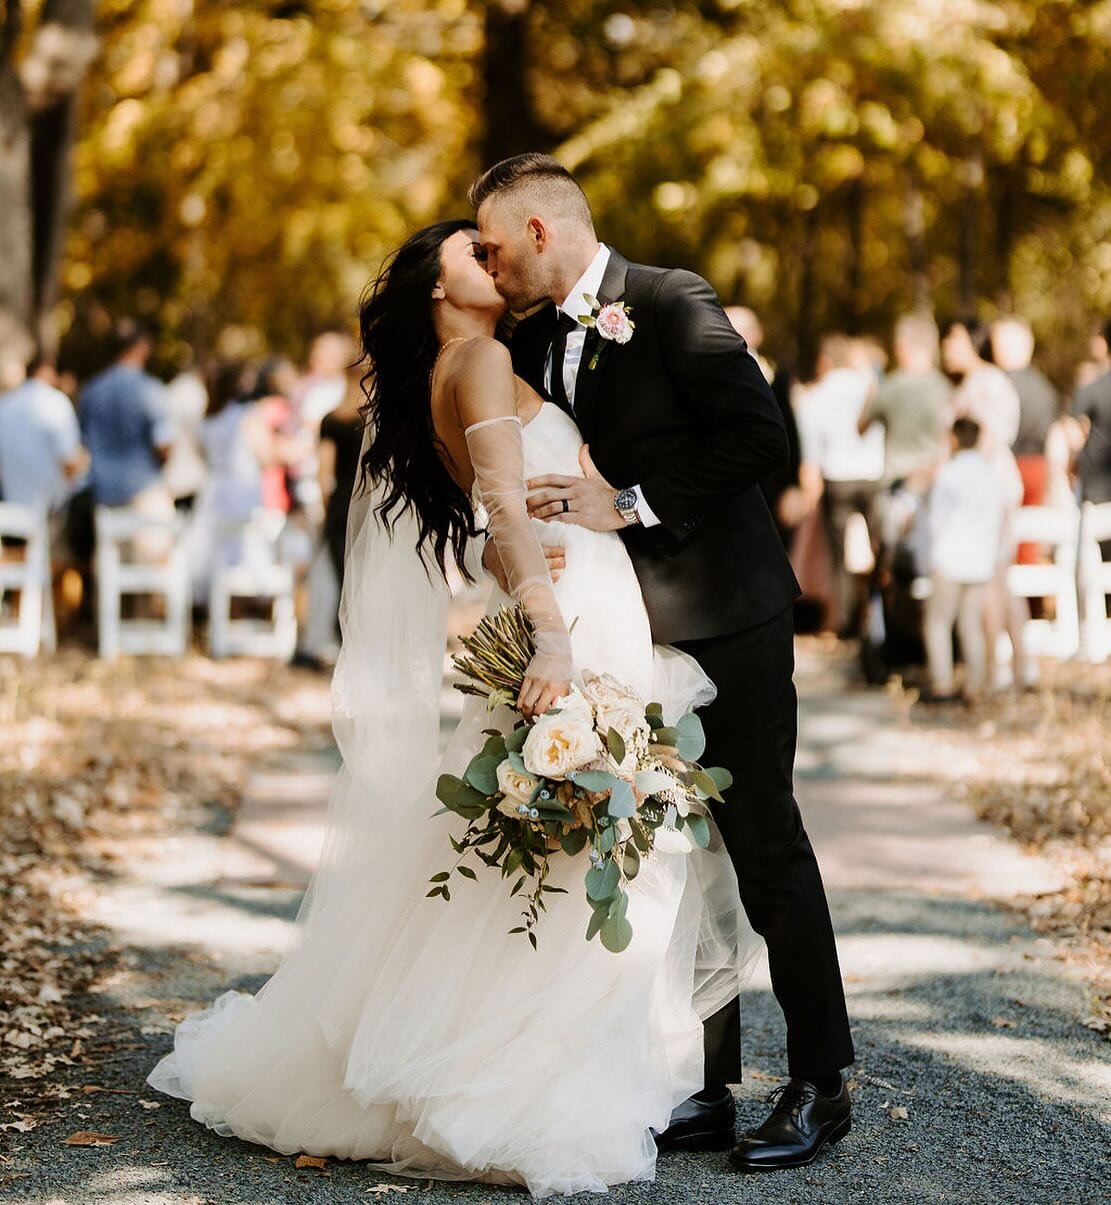 Closing 2023 with Alina and Serge's enchanting fall wedding &ndash; a day of golden rays, celebration, love, and cherished friendships. What a beautiful privilege it was to intimately witness and capture every unfolding moment. 🍂💖 

WHO IS READY FO